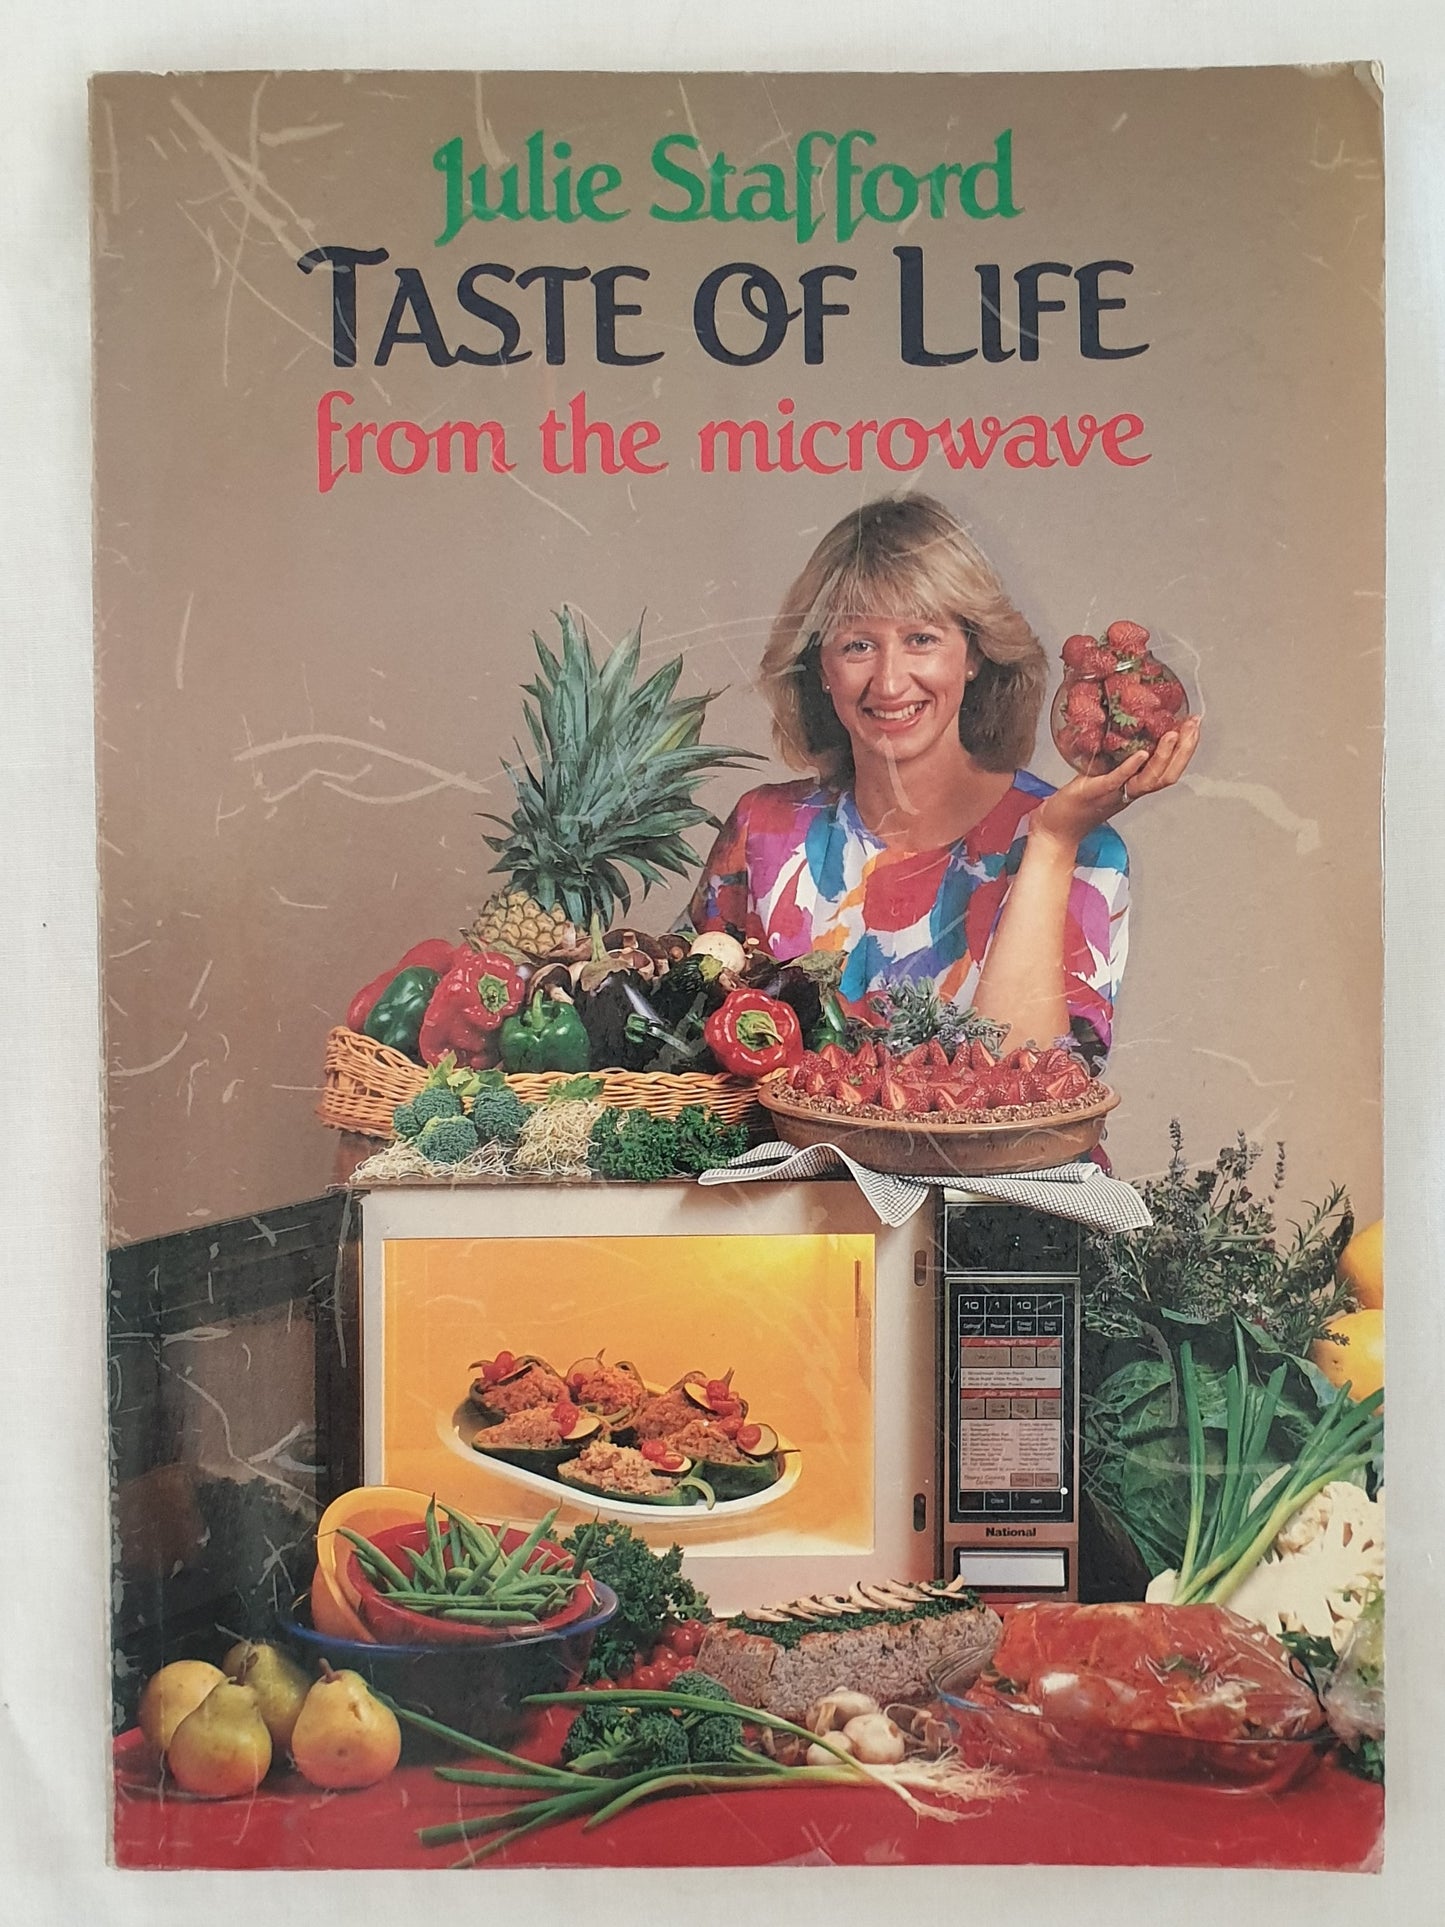 Taste of Life from the Microwave by Julie Stafford